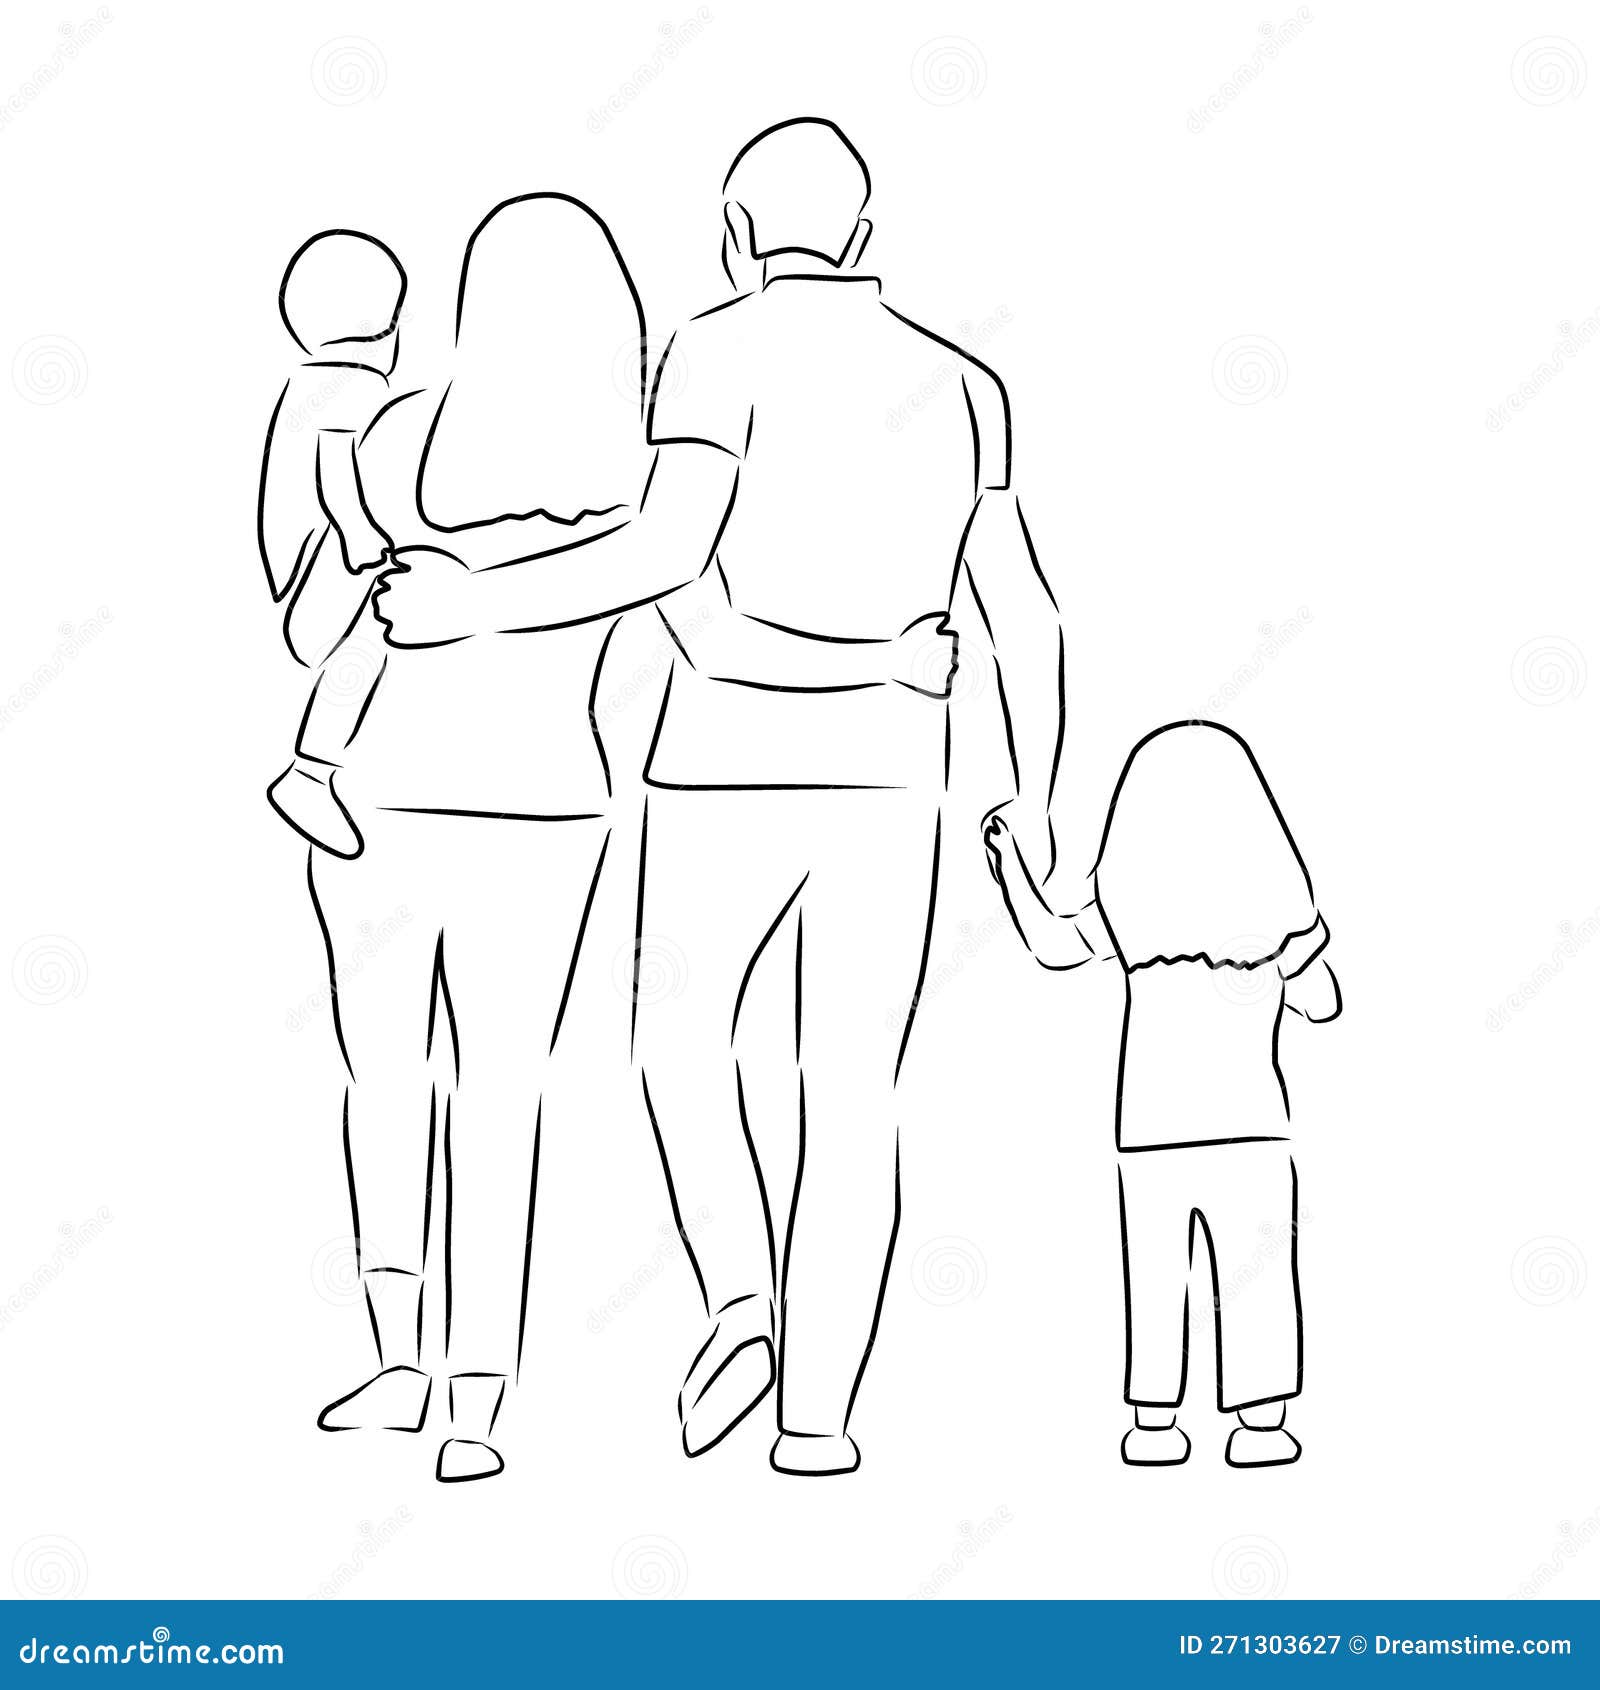 Details more than 180 family picture drawing latest